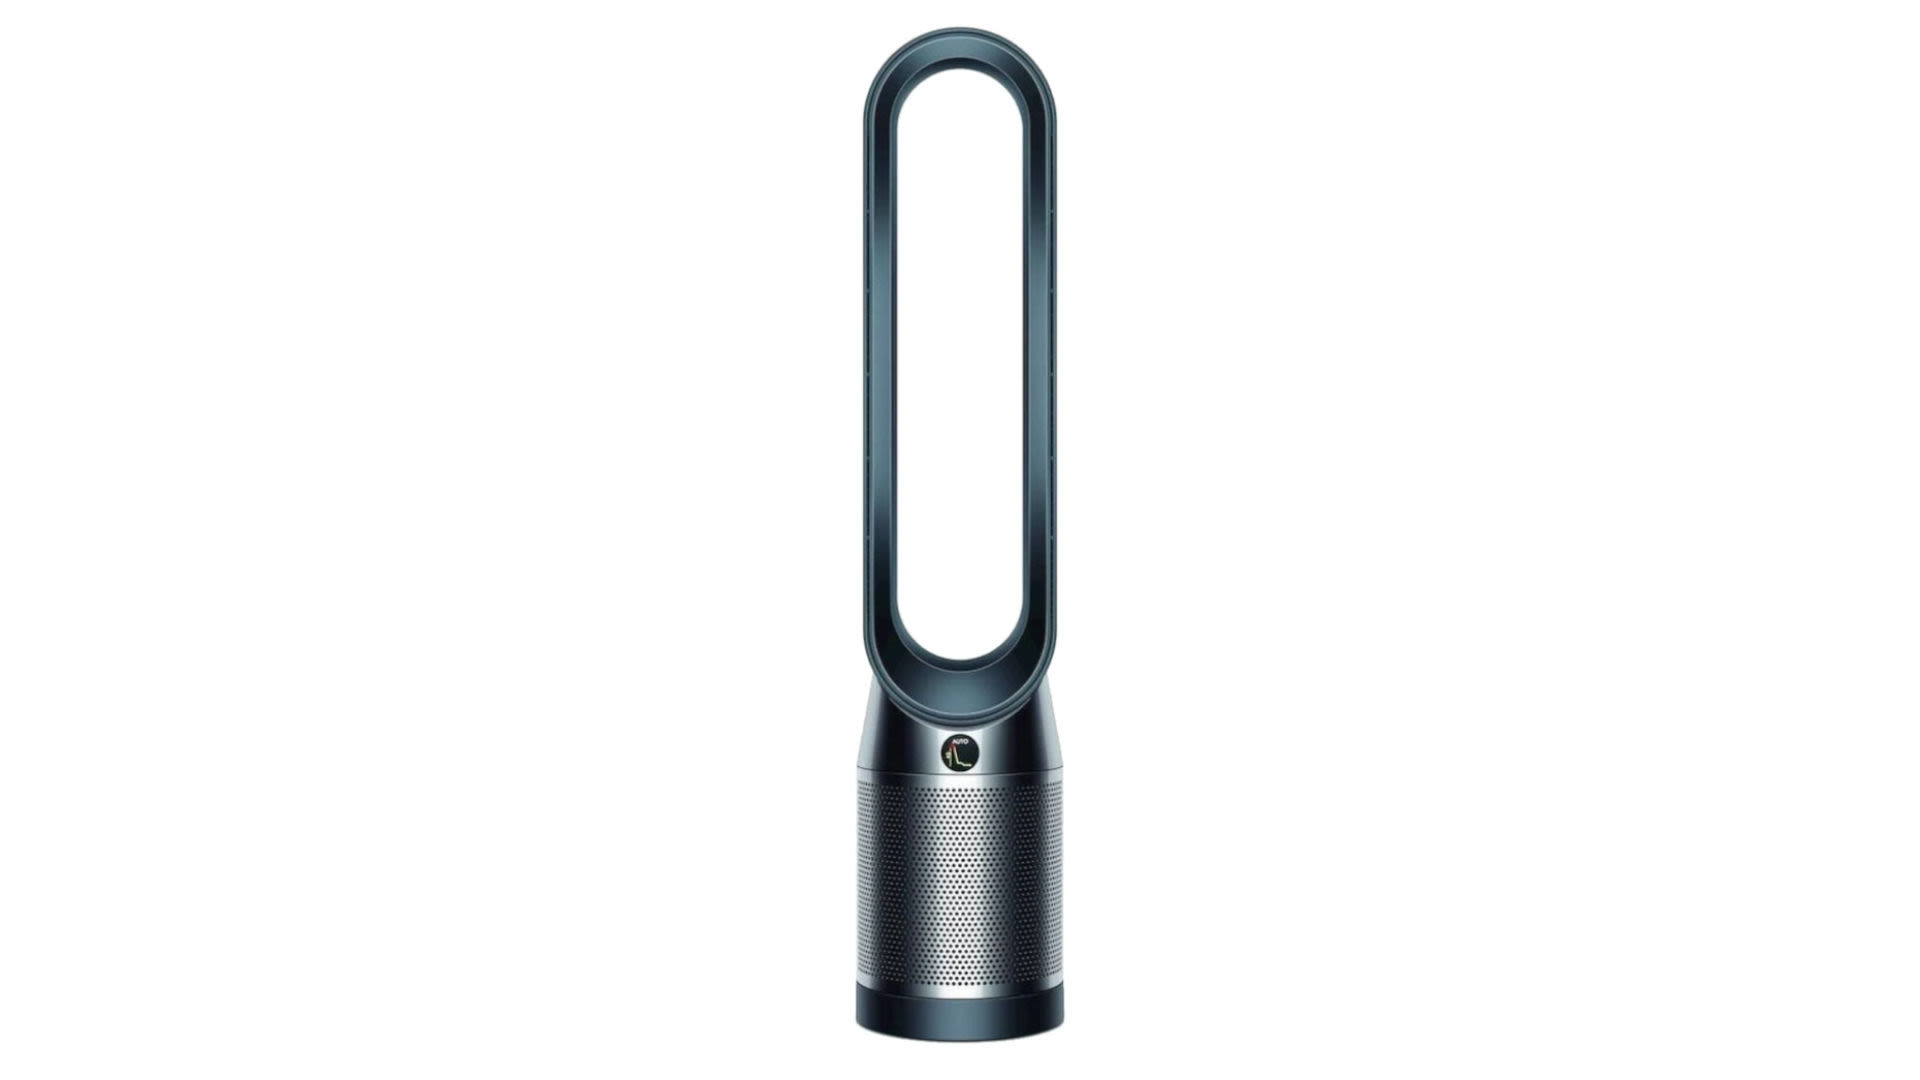 DYSON TP04 Pure Cool Tower Black